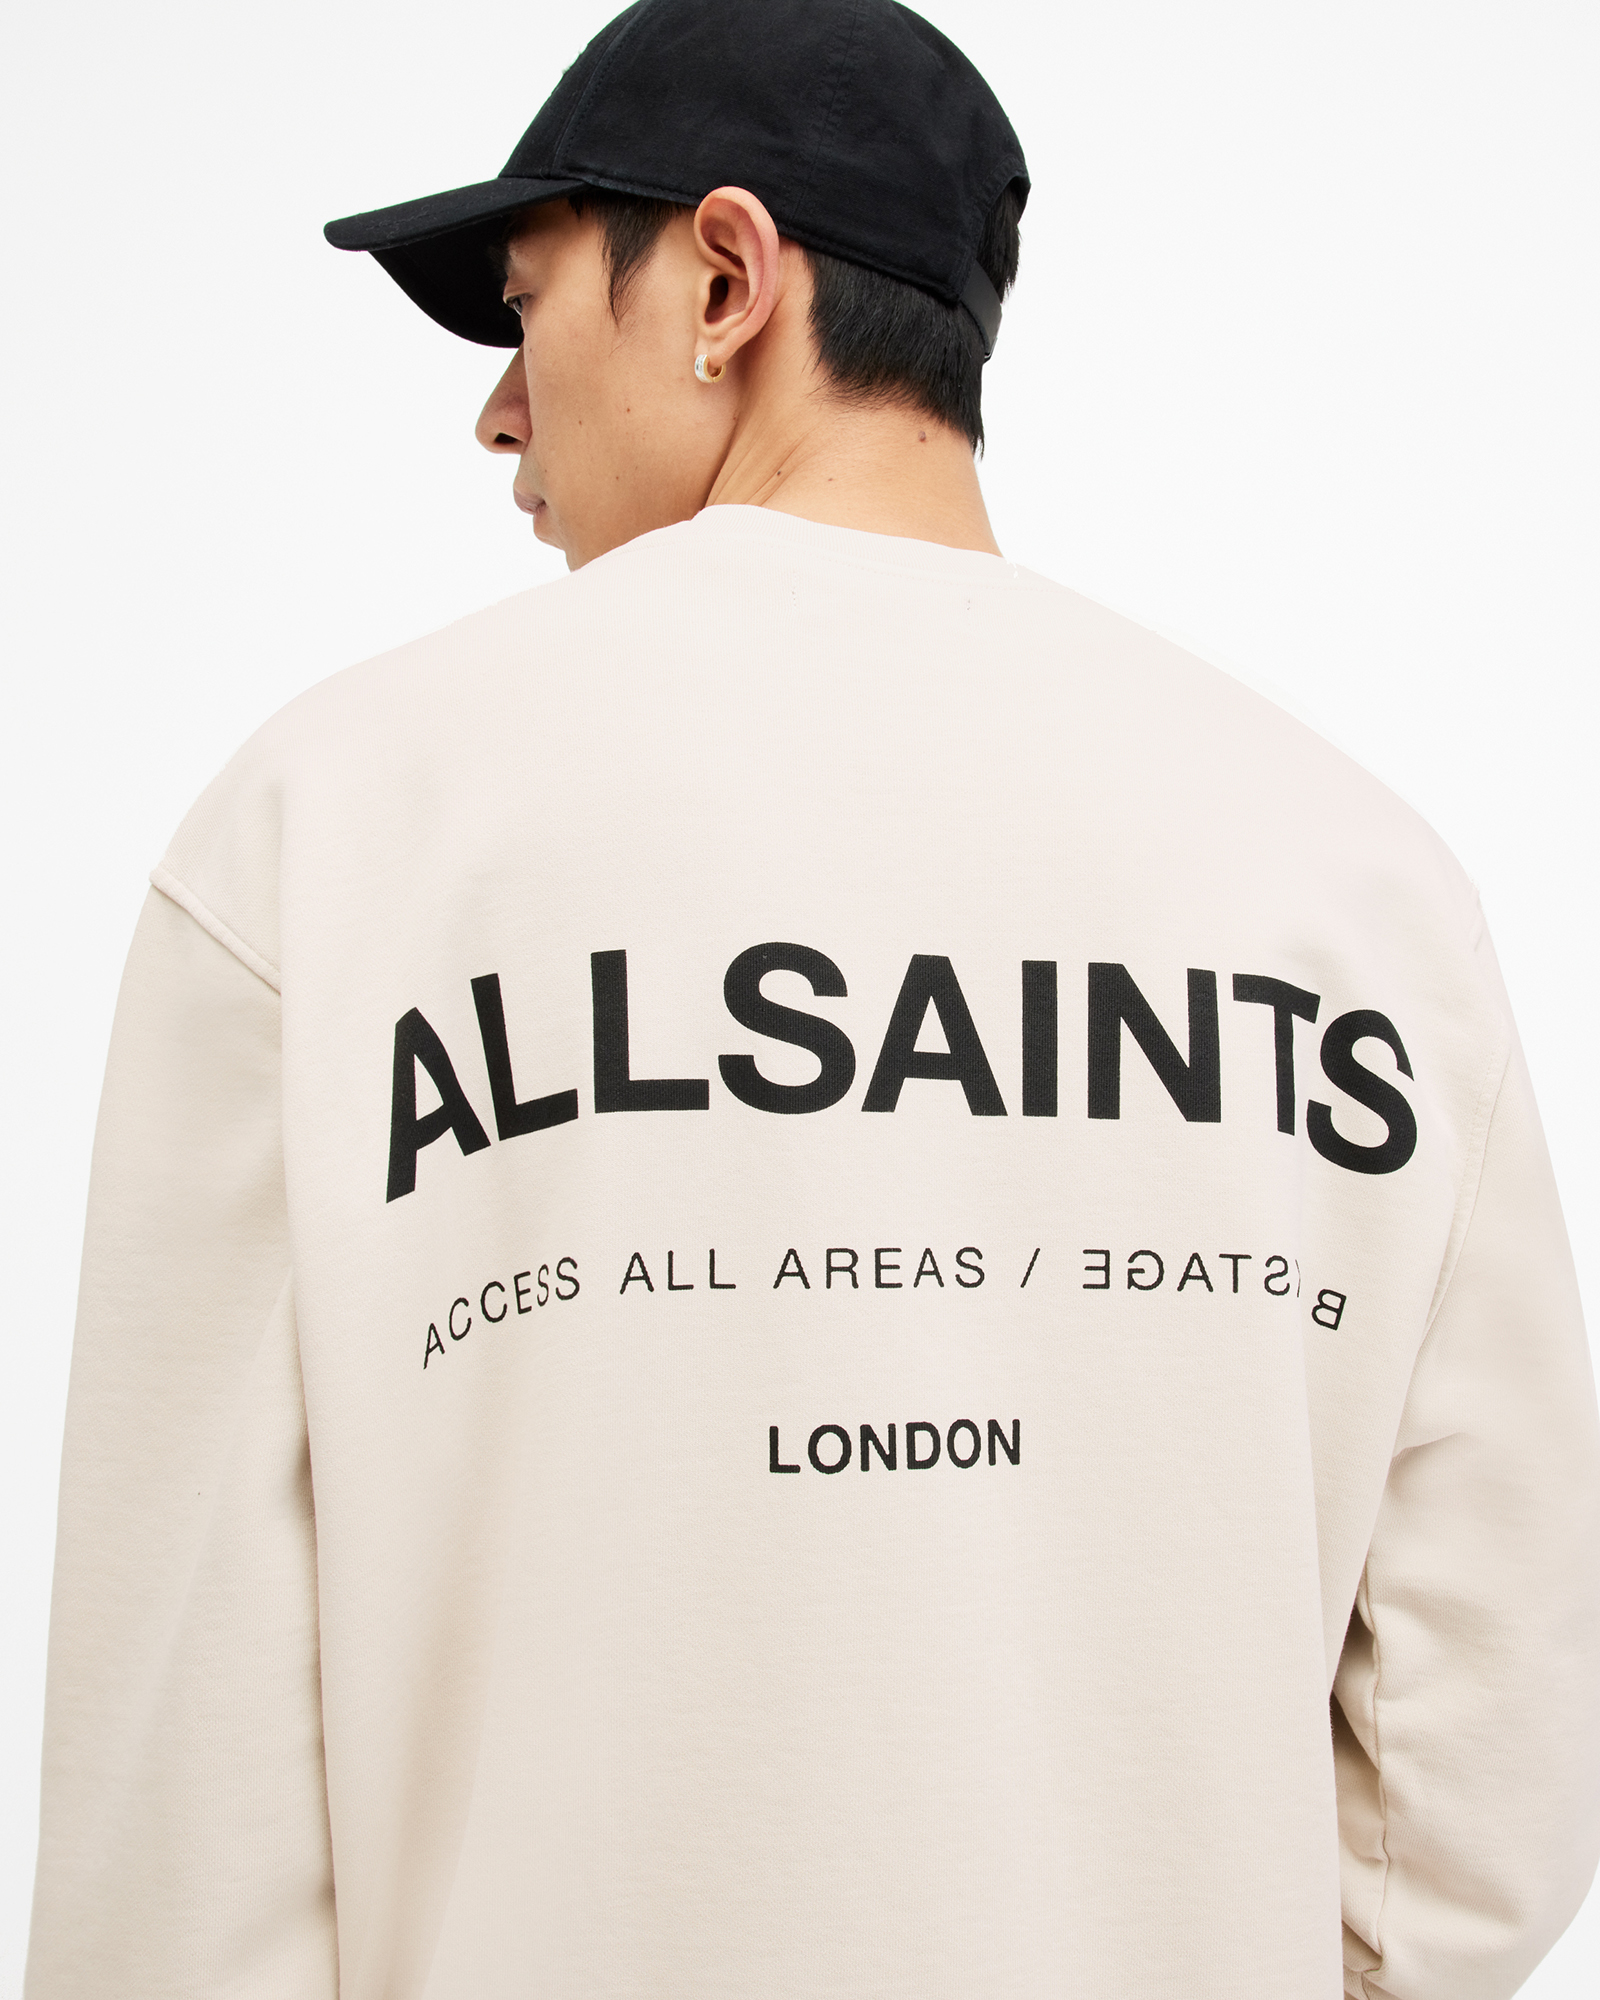 AllSaints Access Relaxed Fit Crew Neck Sweatshirt,, BAILEY TAUPE